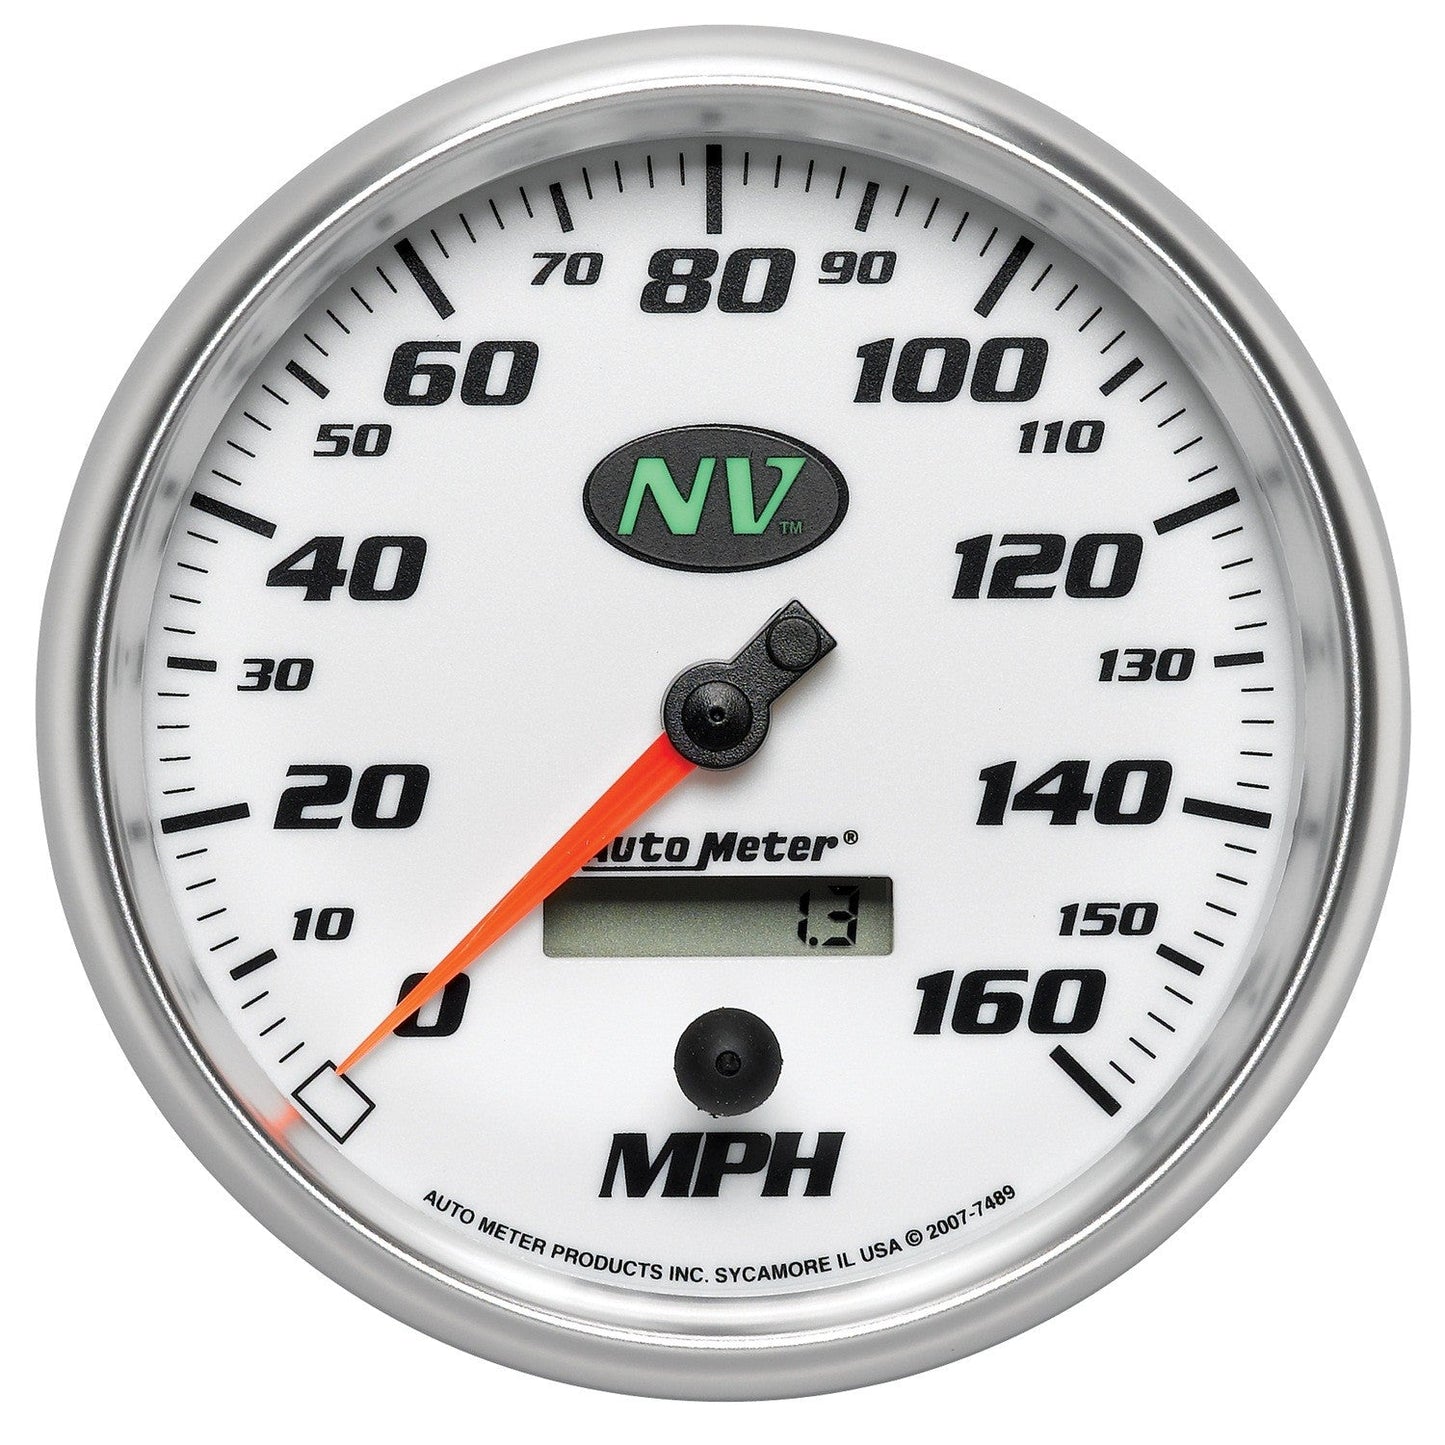 AutoMeter - 5" SPEEDOMETER, 0-160 MPH, ELECTRIC, NV (7489)